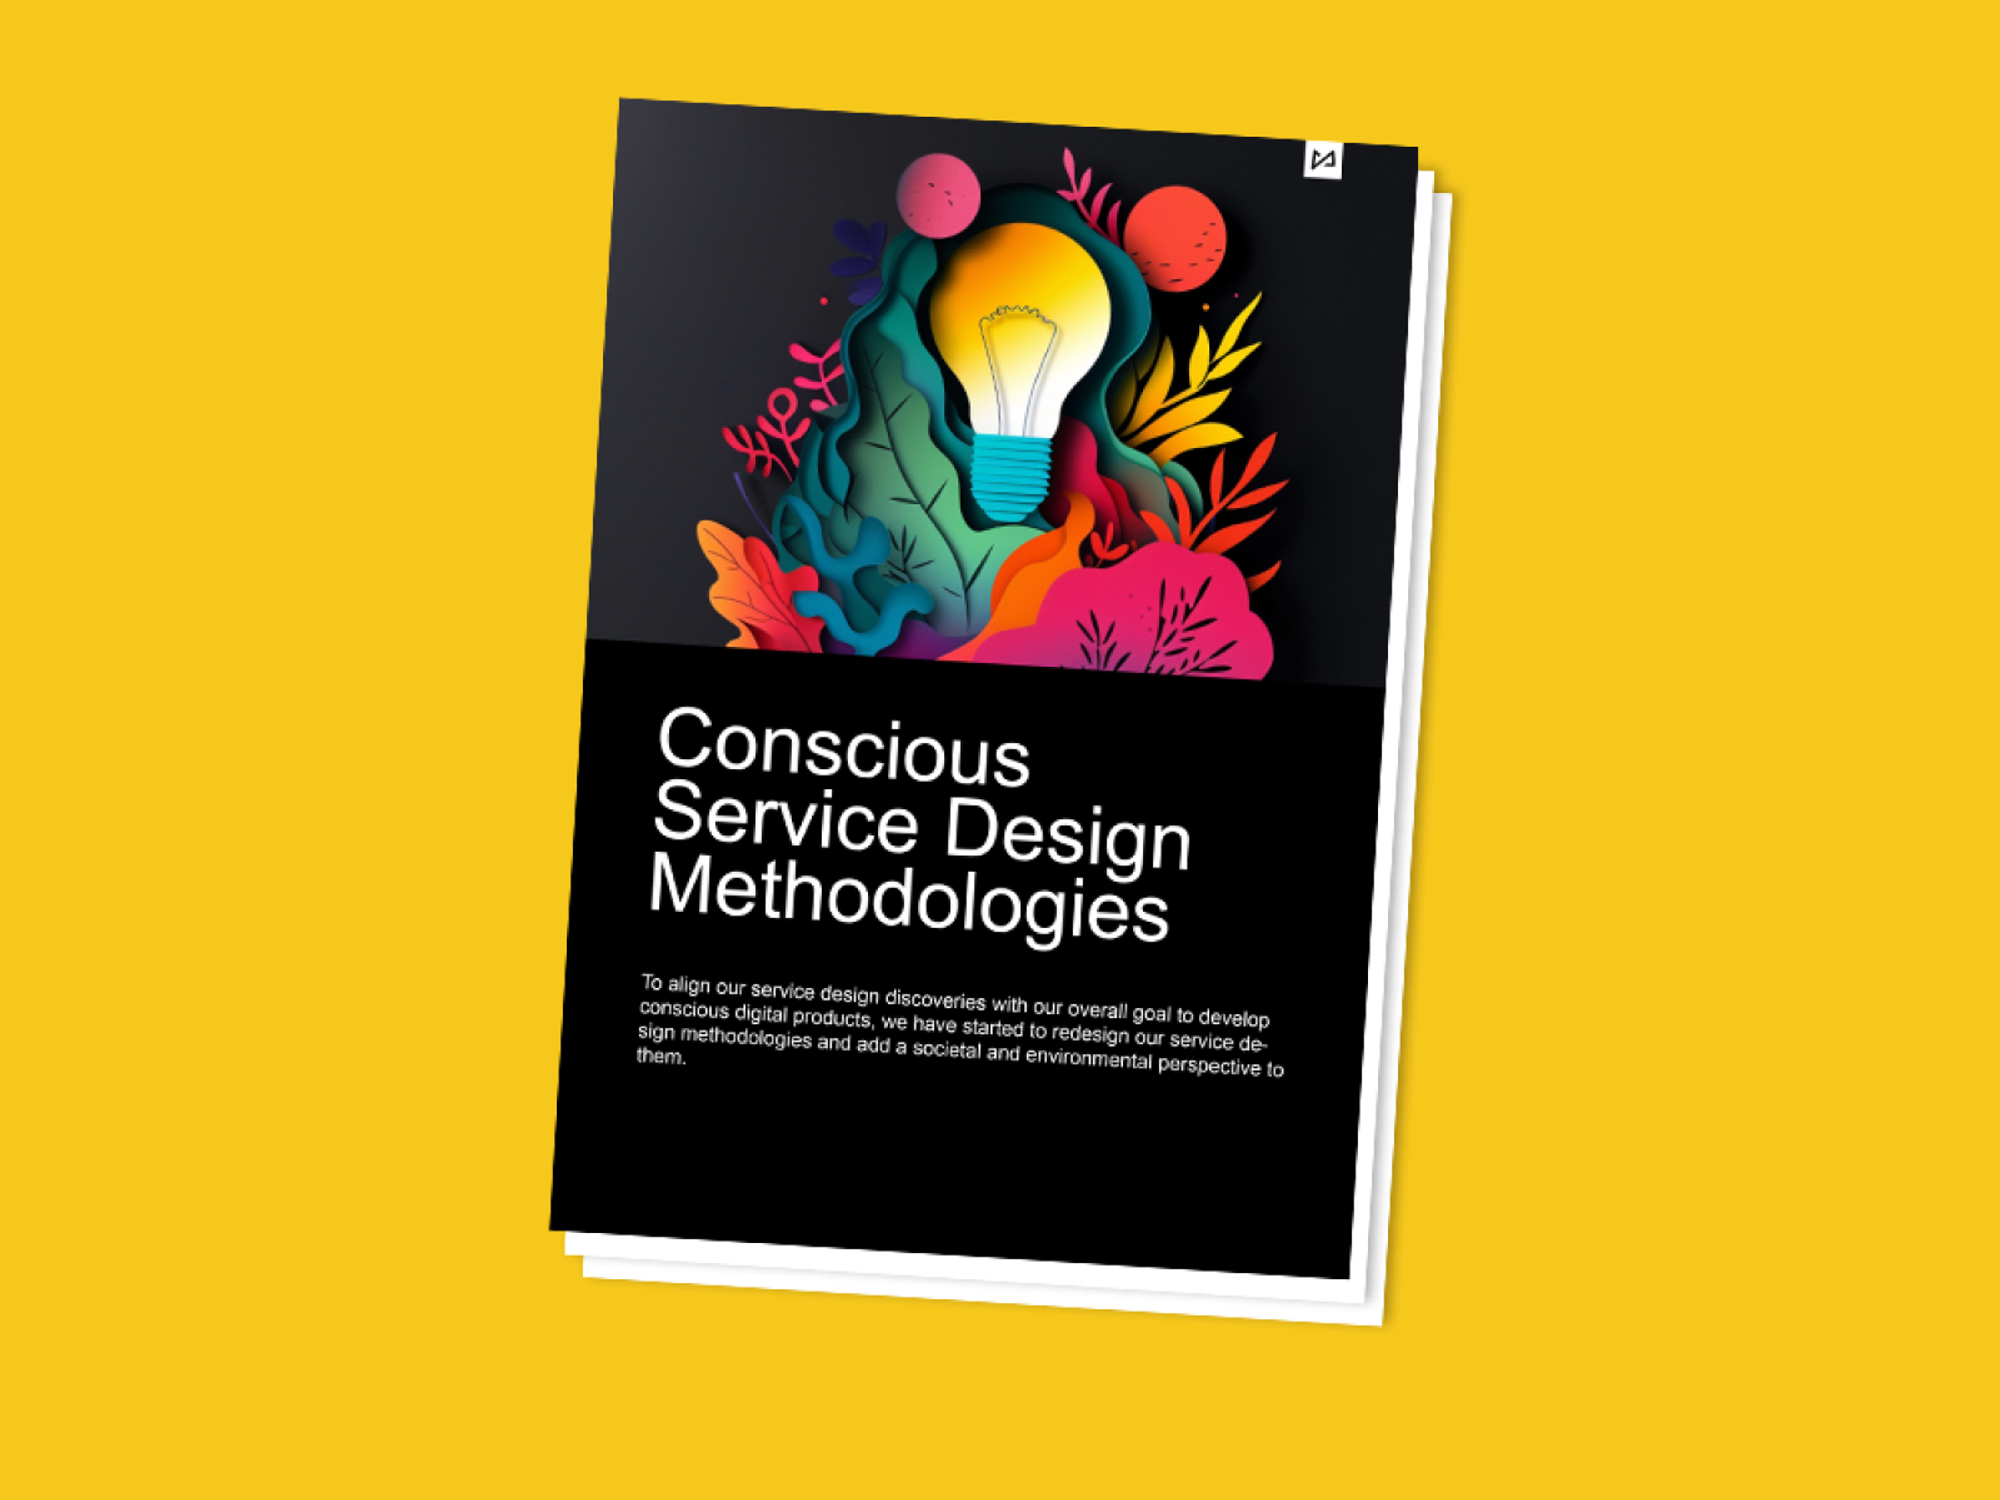 Image of booklet reading "Conscious Service Design Methods" on its cover